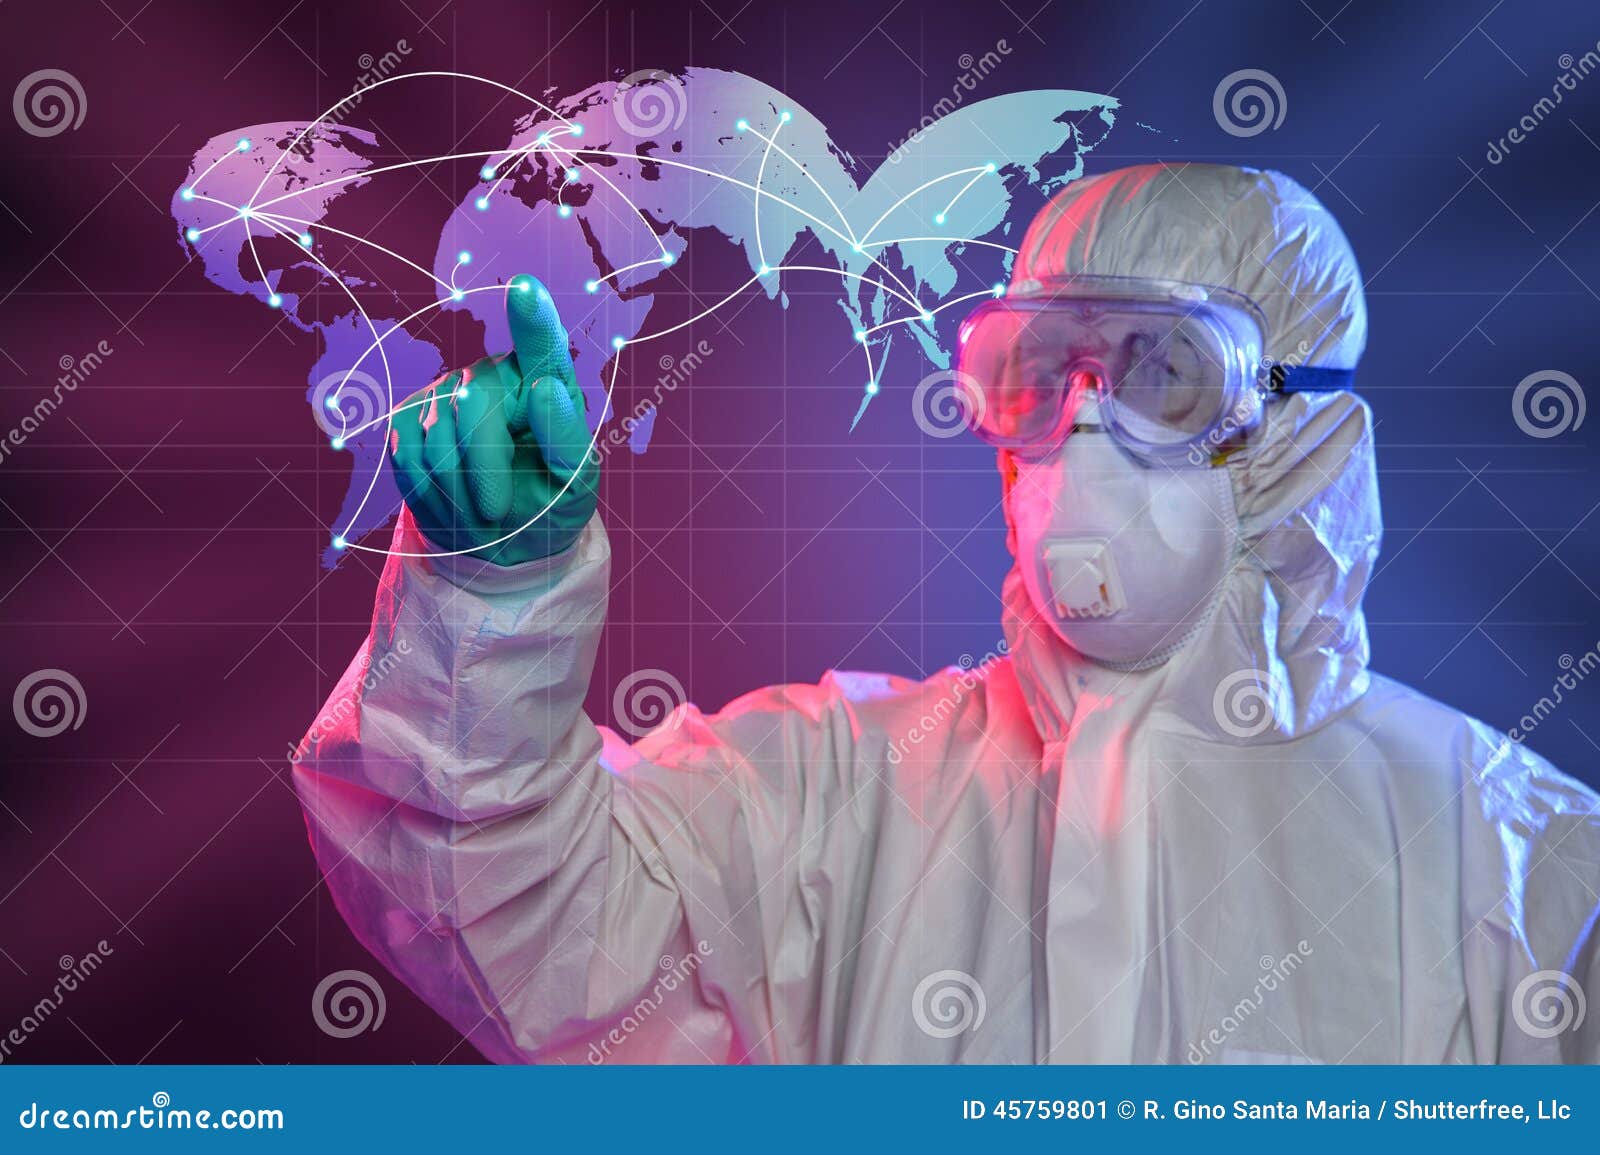 scientist touching screen where ebola virus started